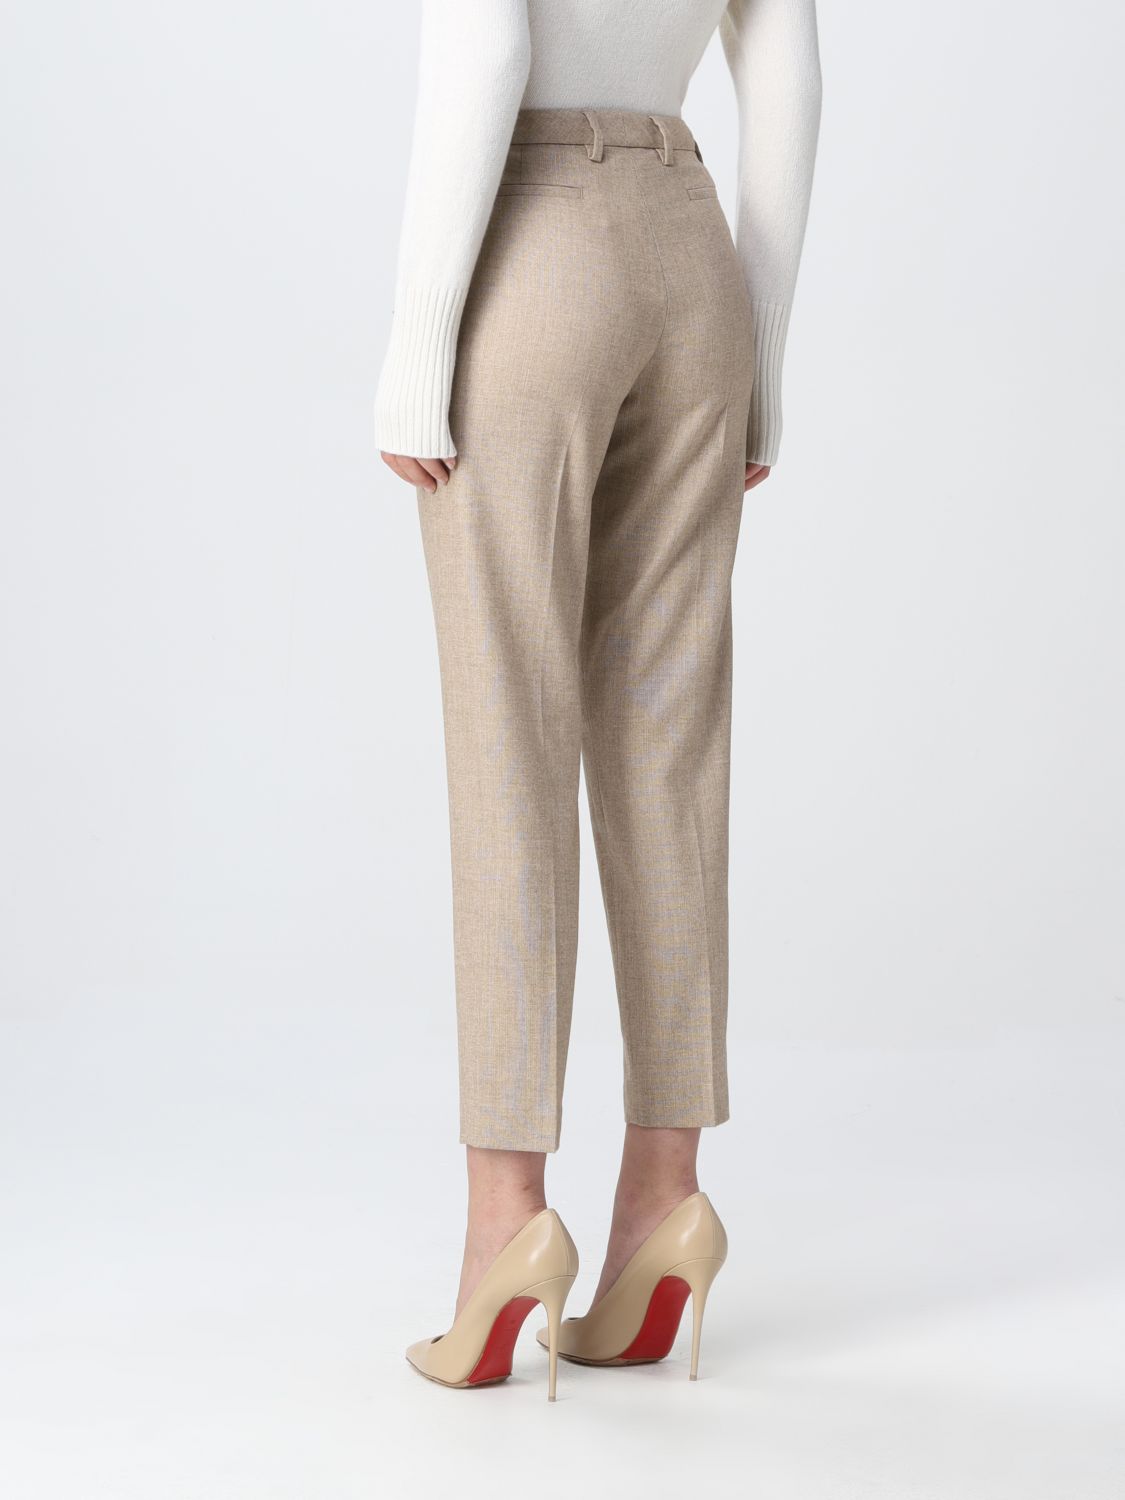 Pantalon Fabiana Filippi: Pantalon Fabiana Filippi femme taupe 2